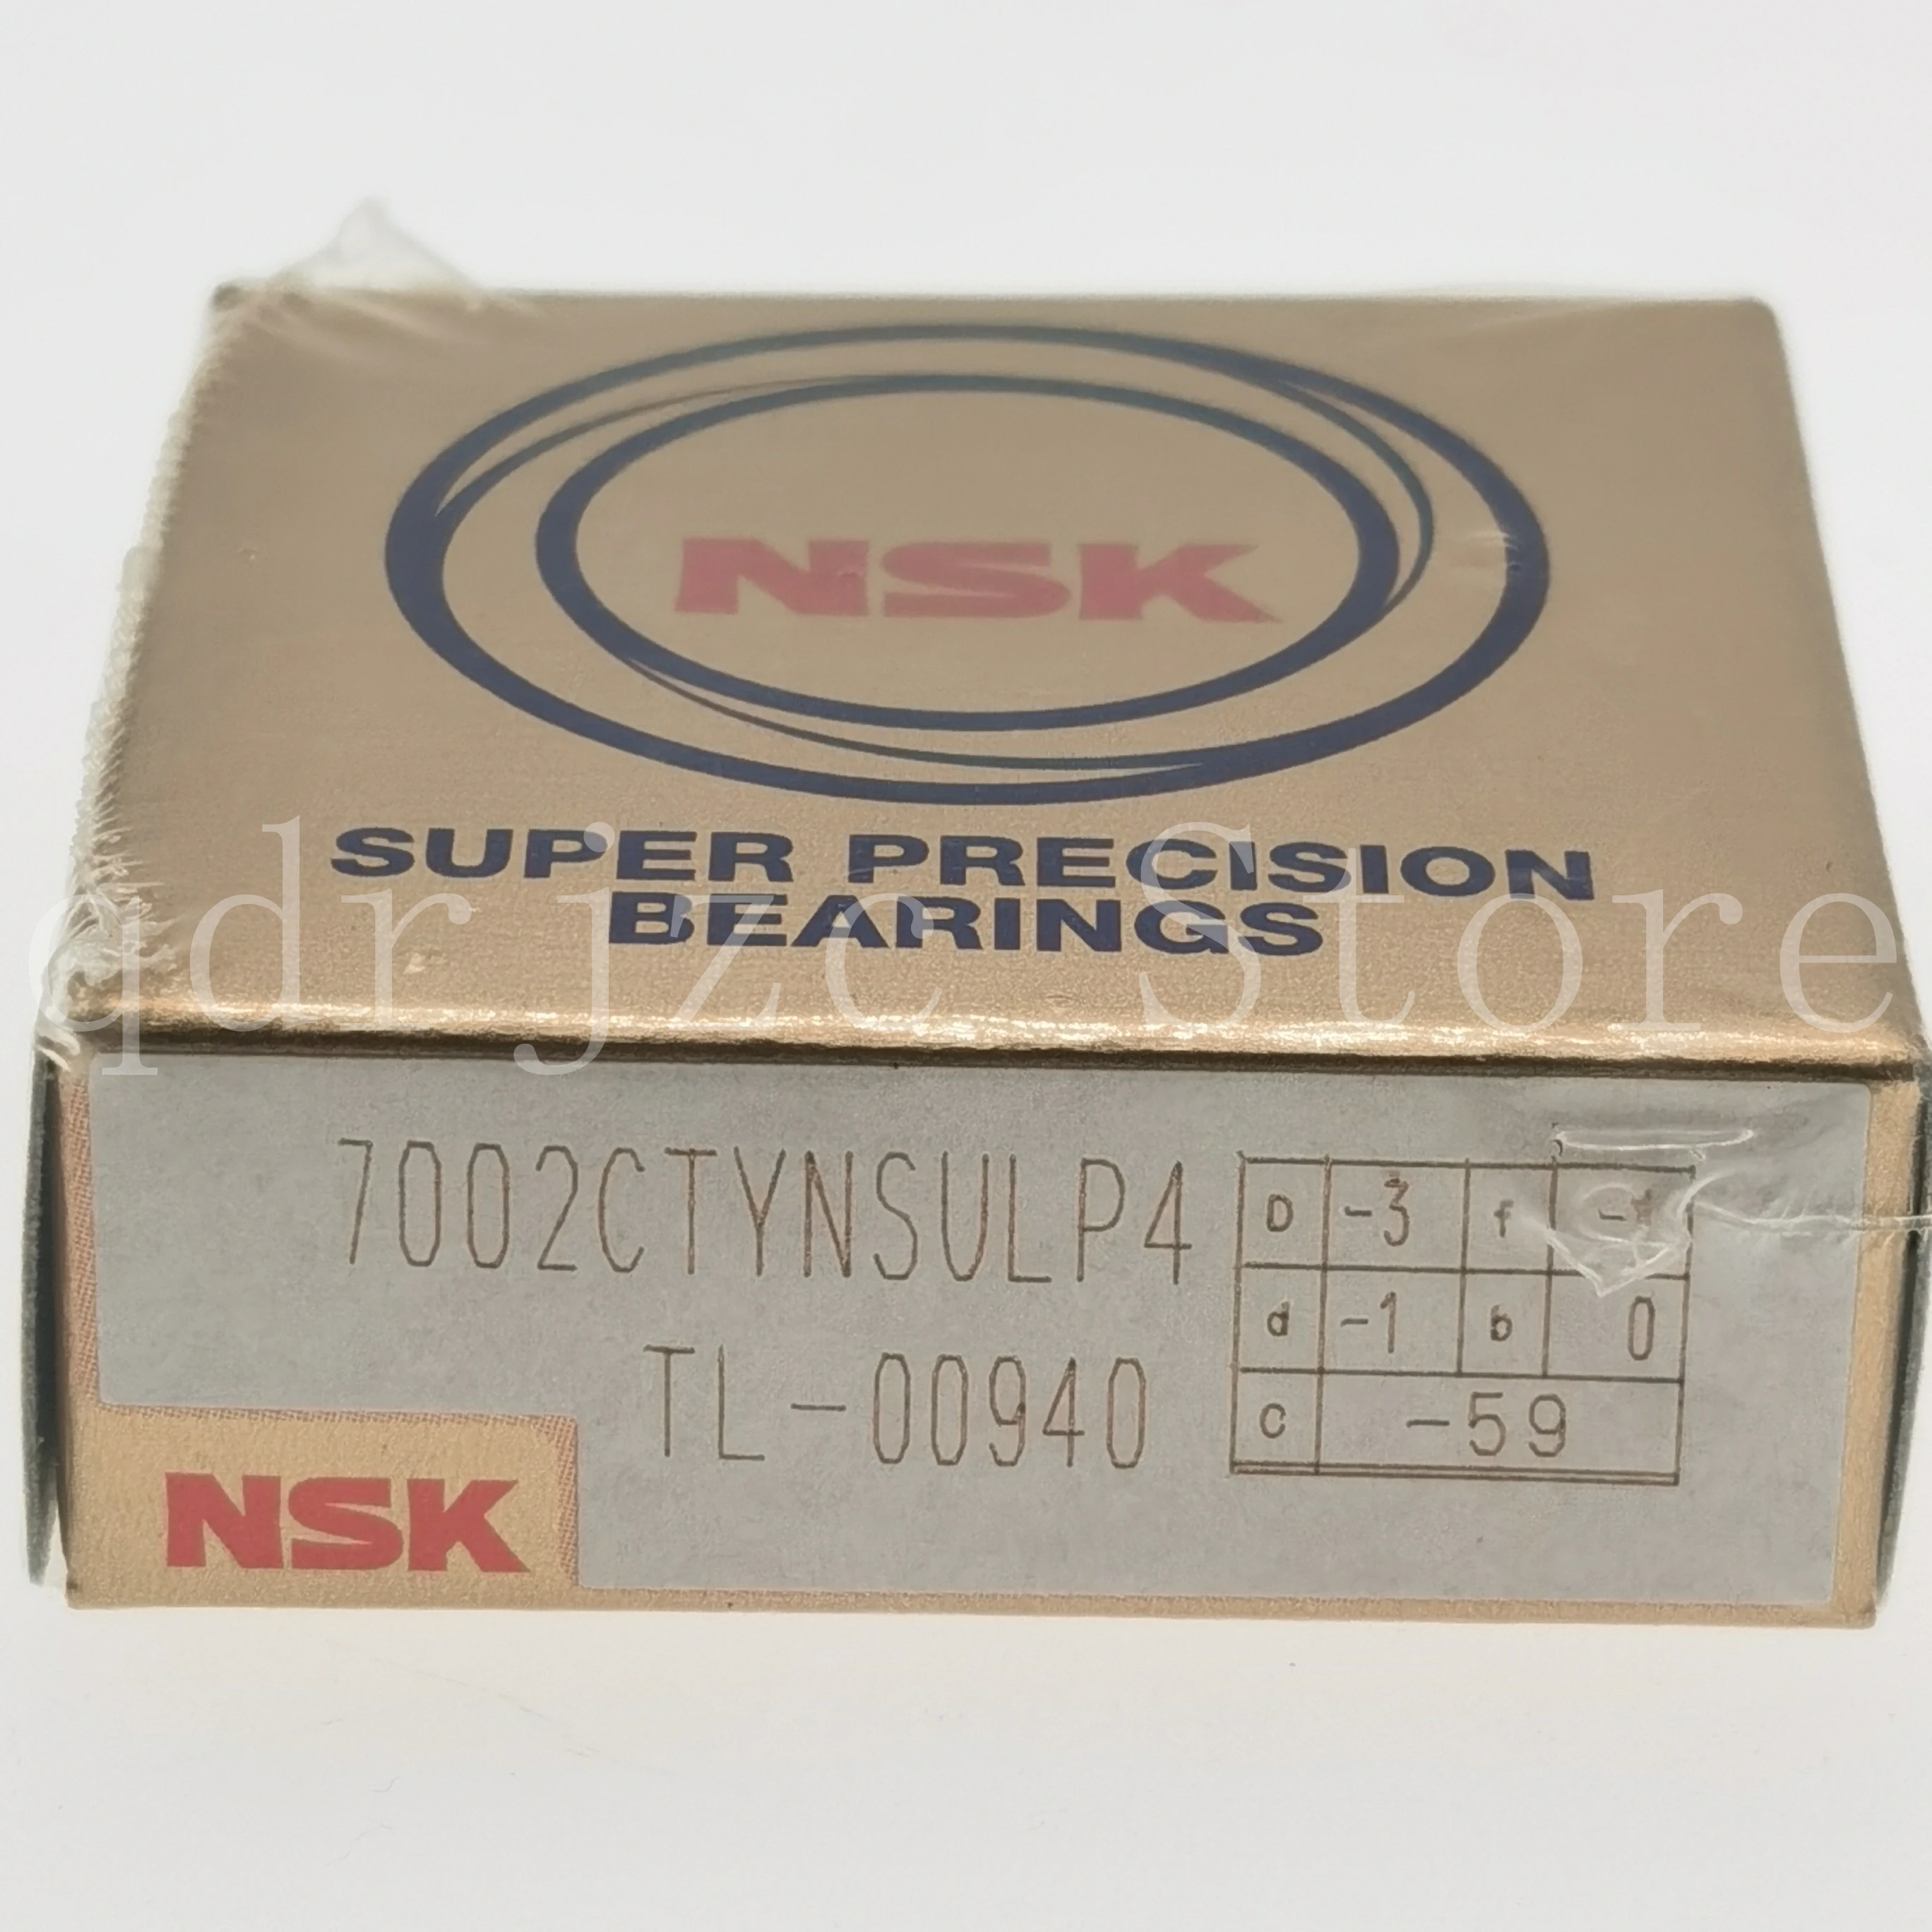 NSK Super Precision Bearing 7906CTYNSULP4 